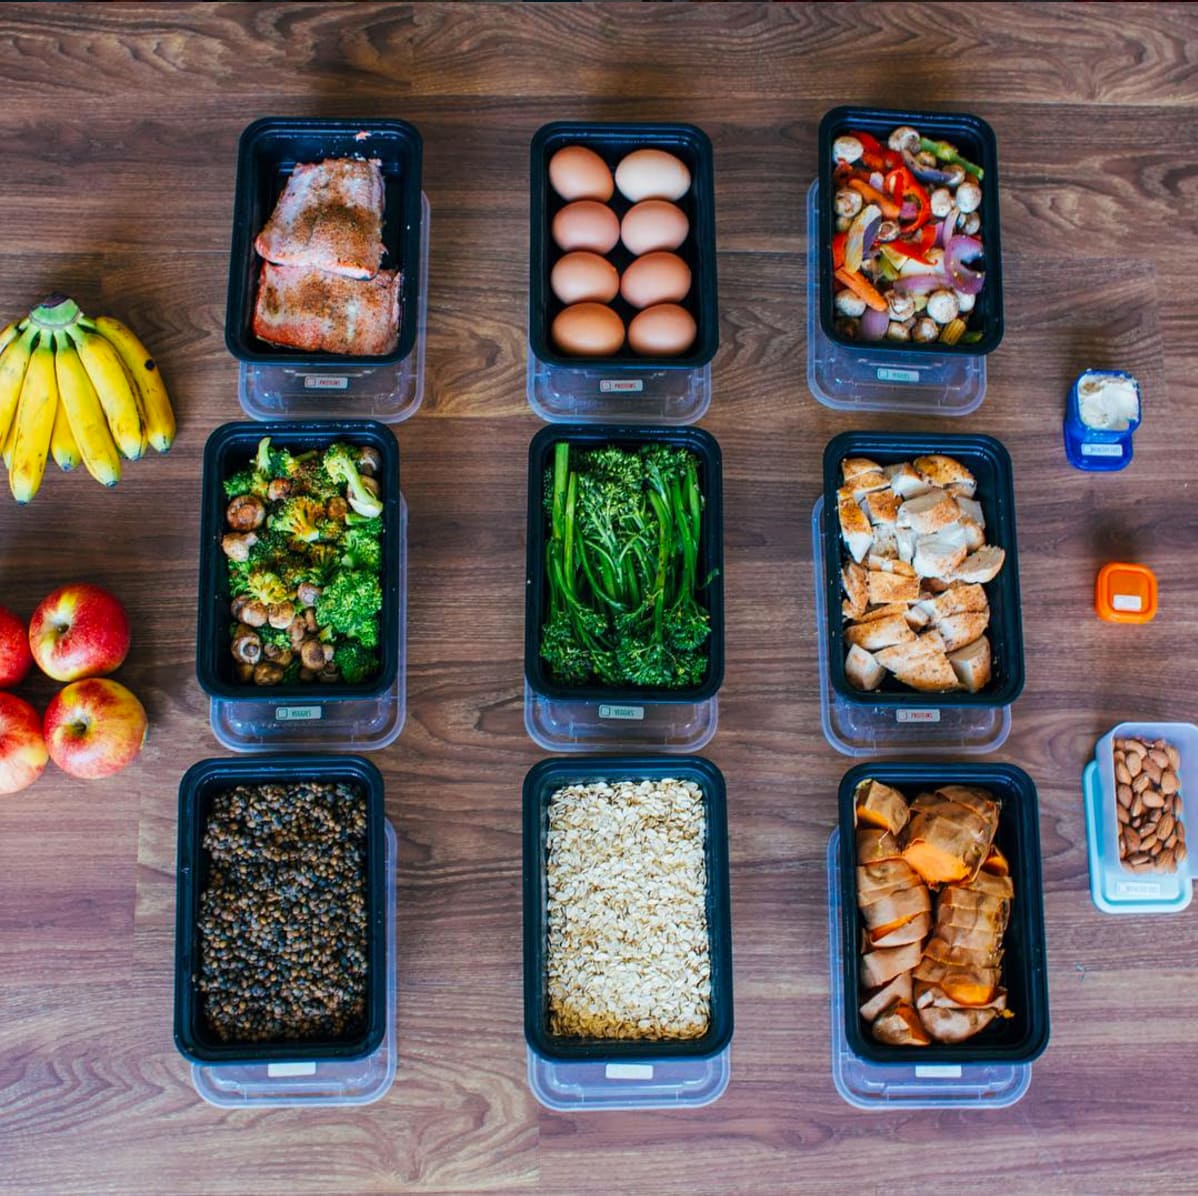 Buffet-style meal prep by meowmeix